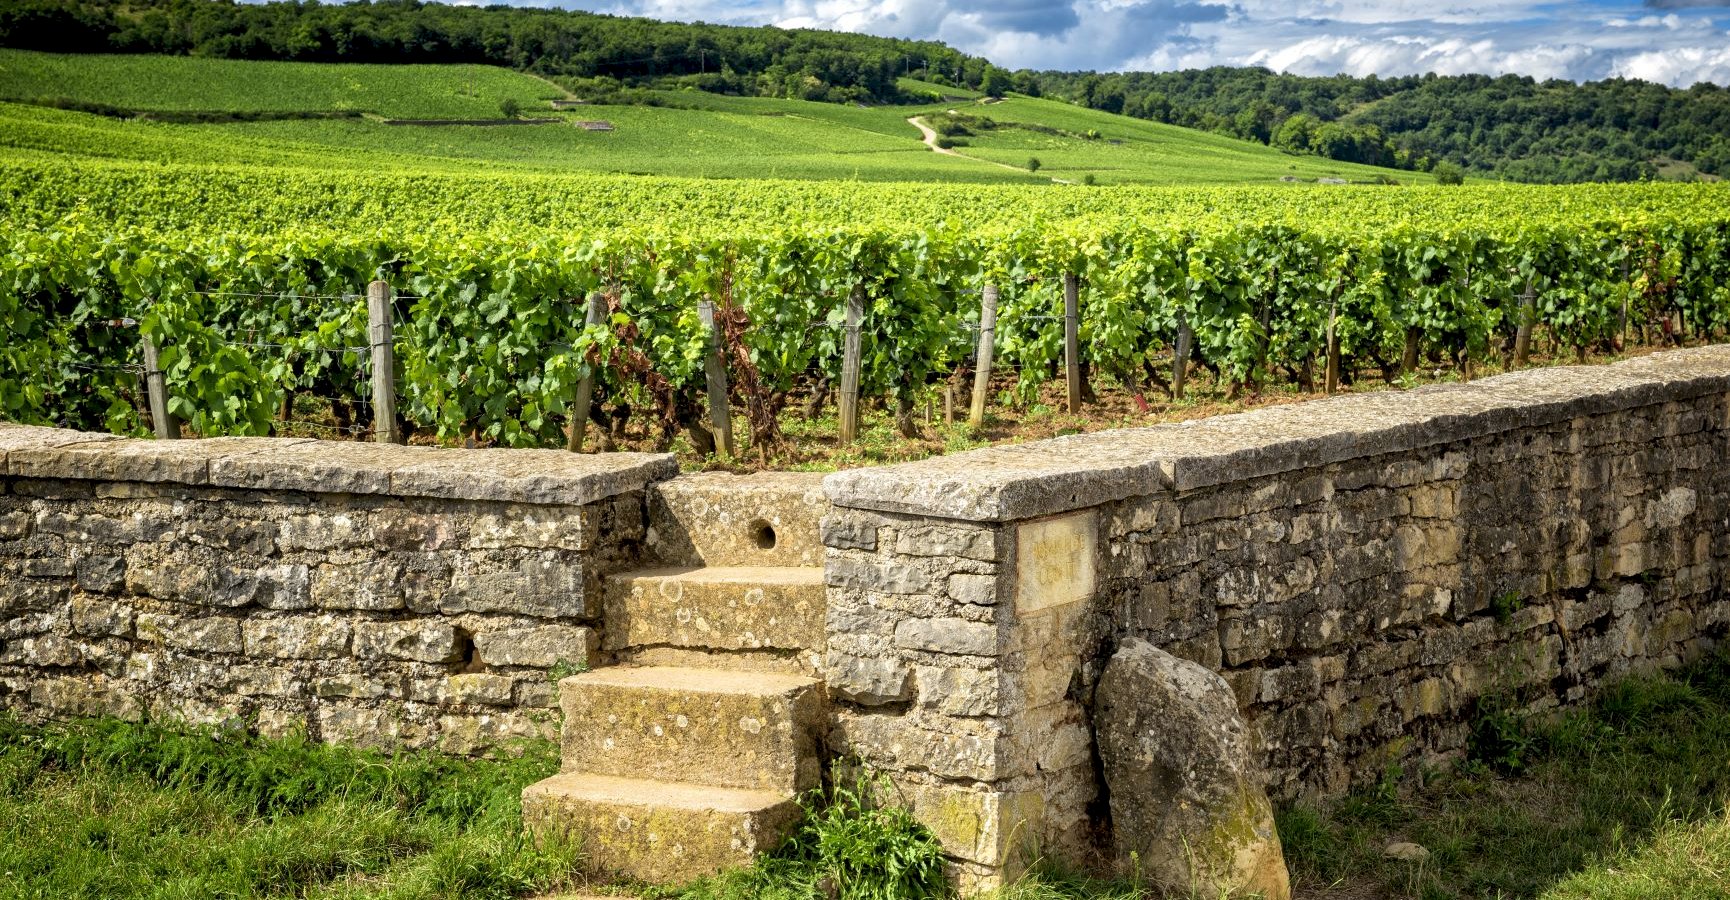 Ophorus Tours - 4 Days Private Burgundy Wine Tour Travel Package - Dijon - 3* Hotel